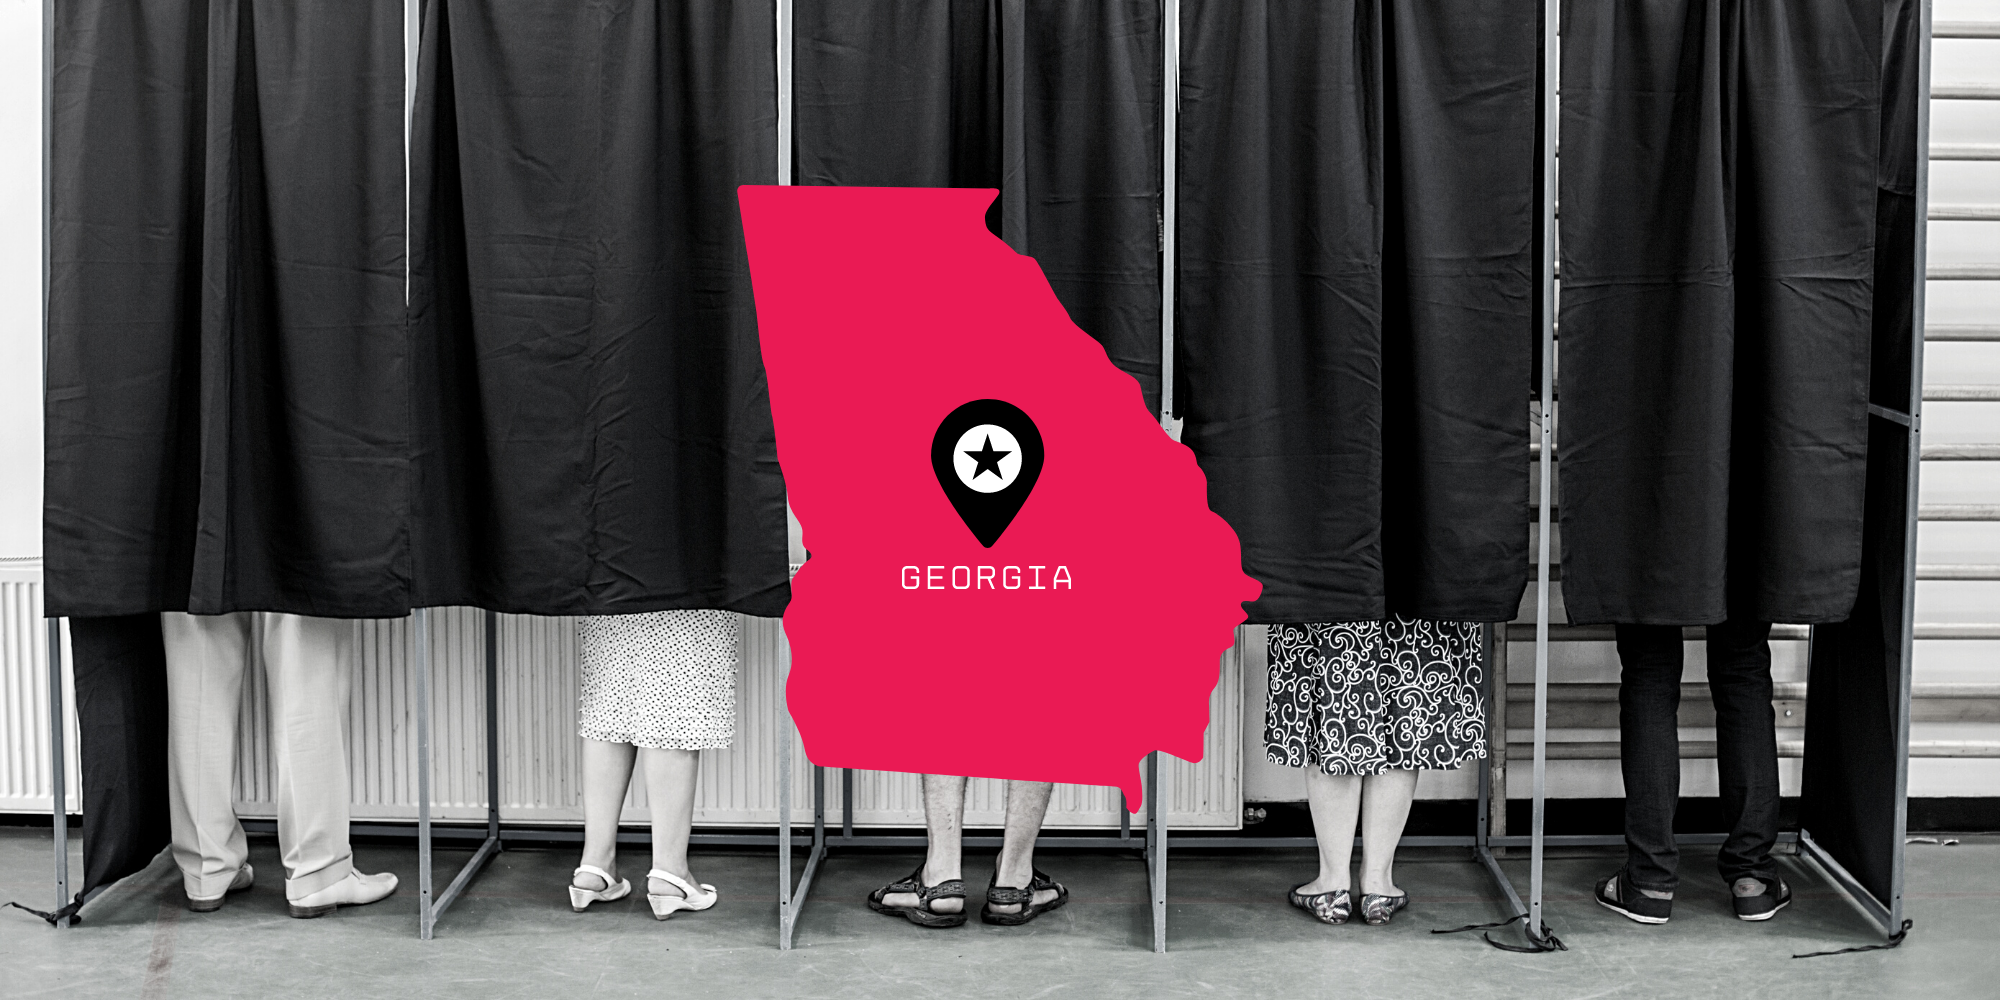 Why is it so hard to vote in Georgia?